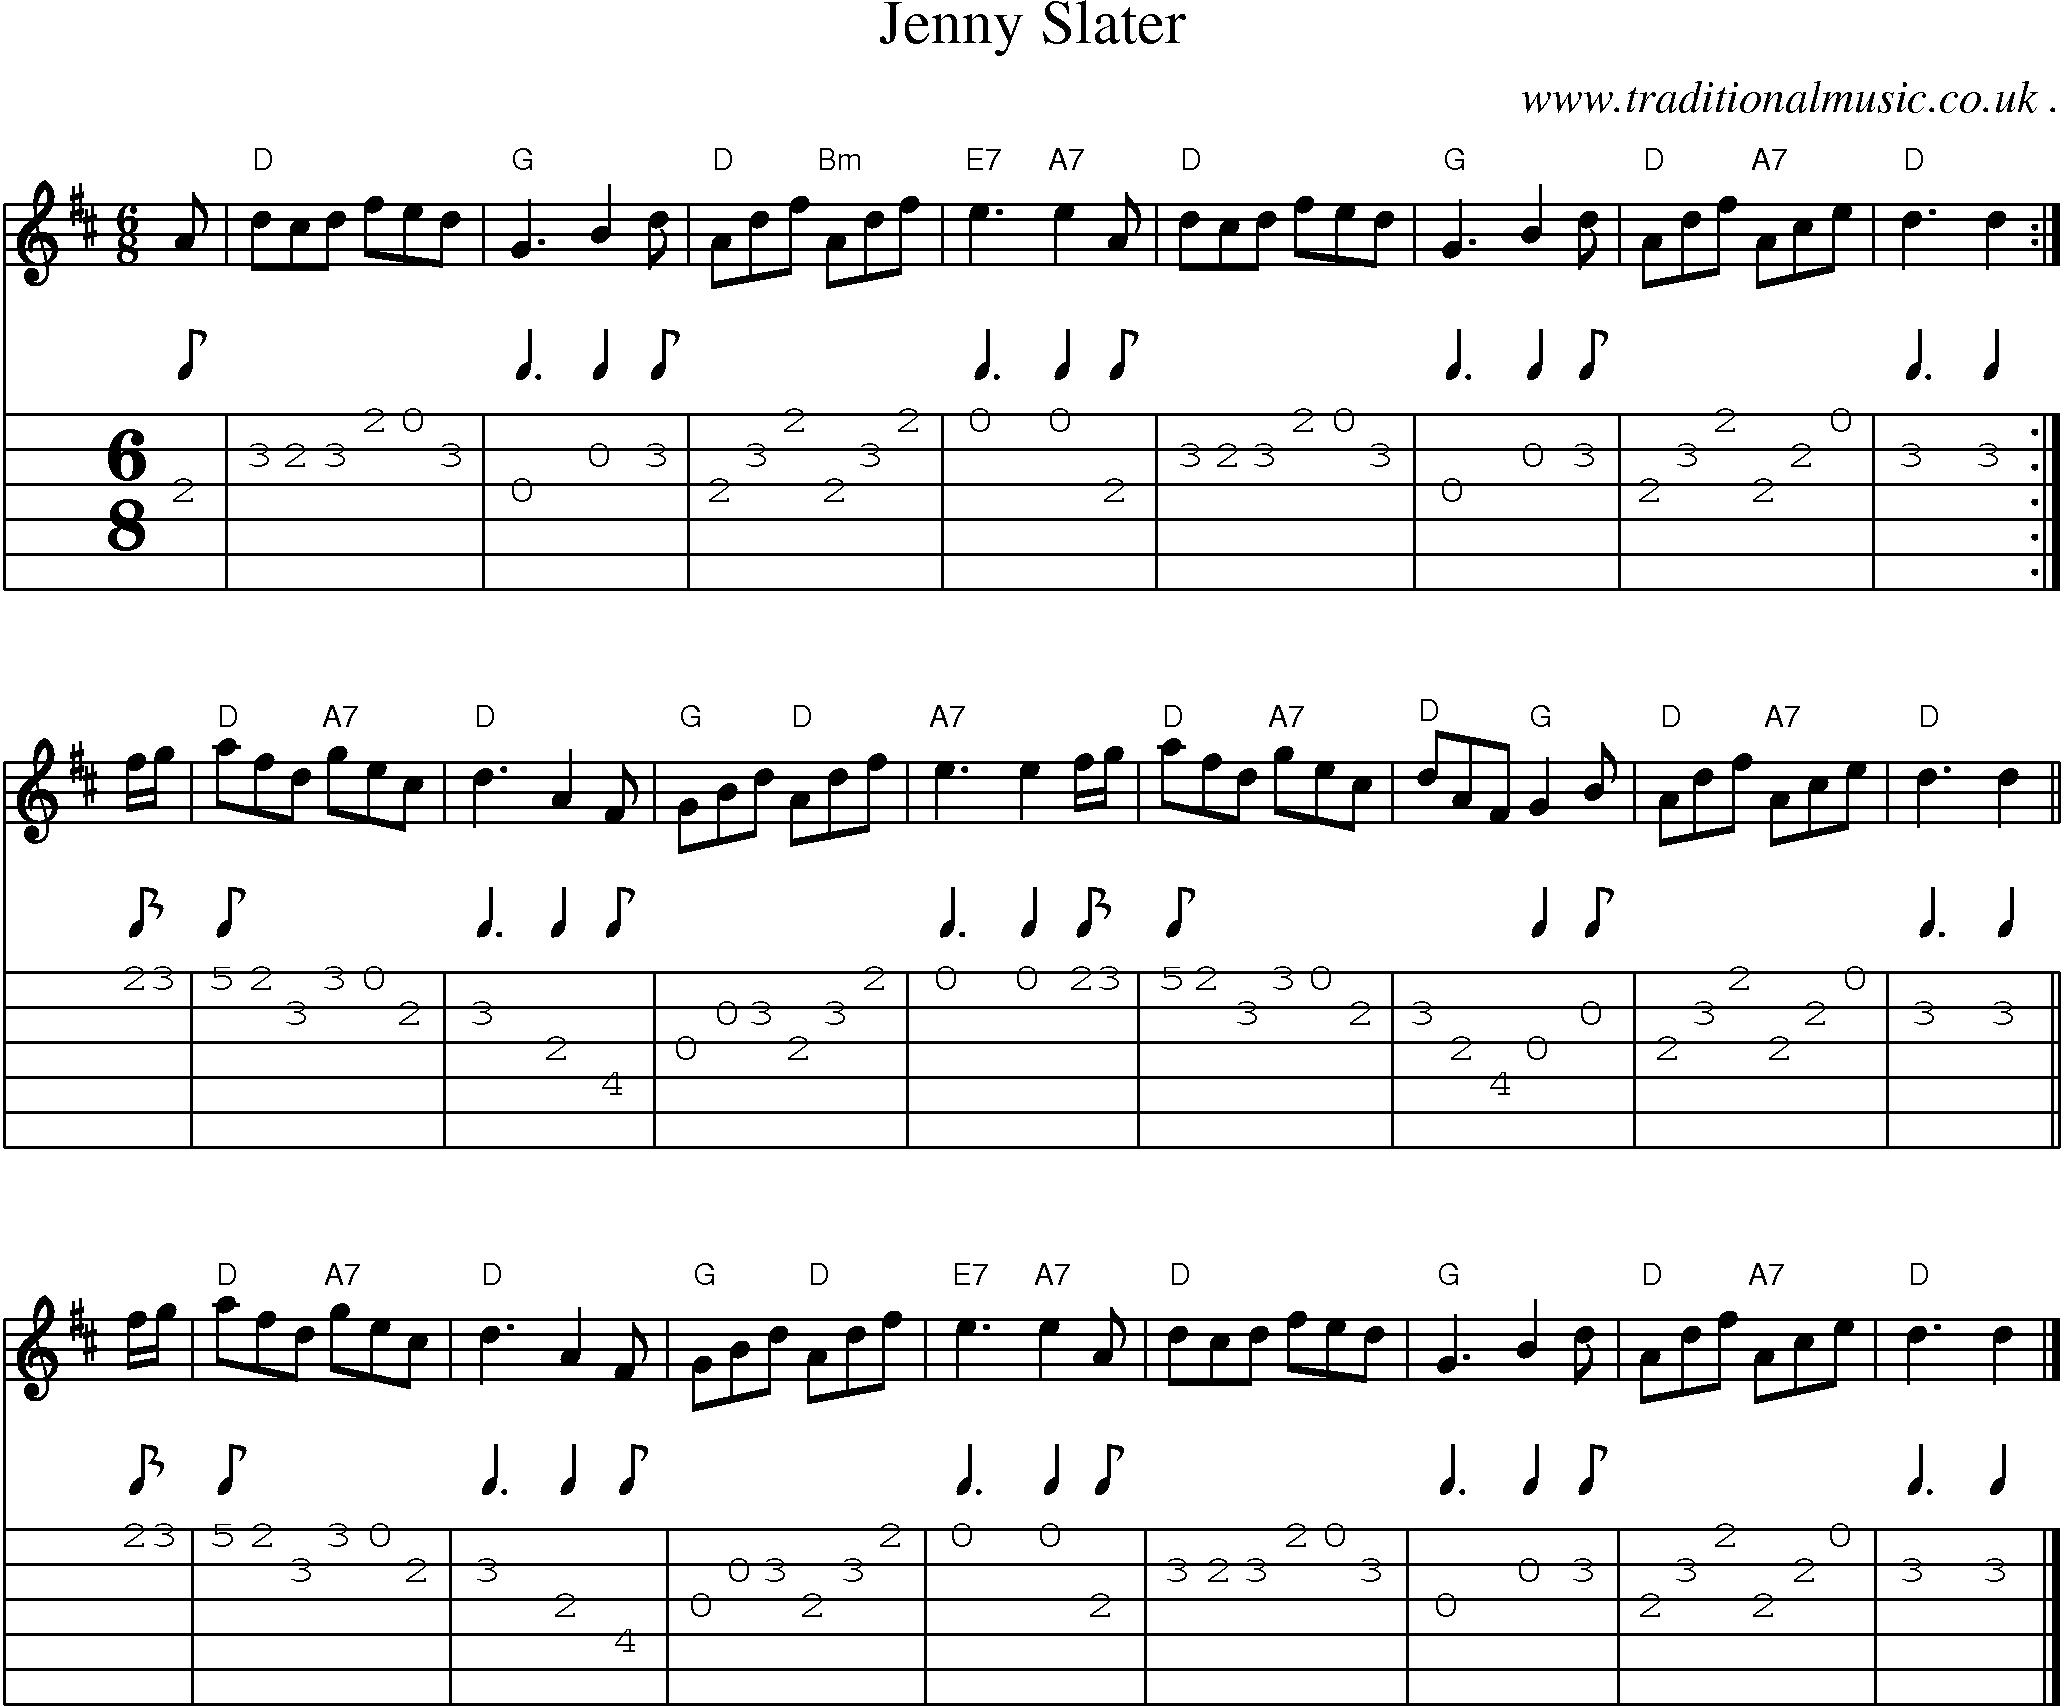 Sheet-music  score, Chords and Guitar Tabs for Jenny Slater